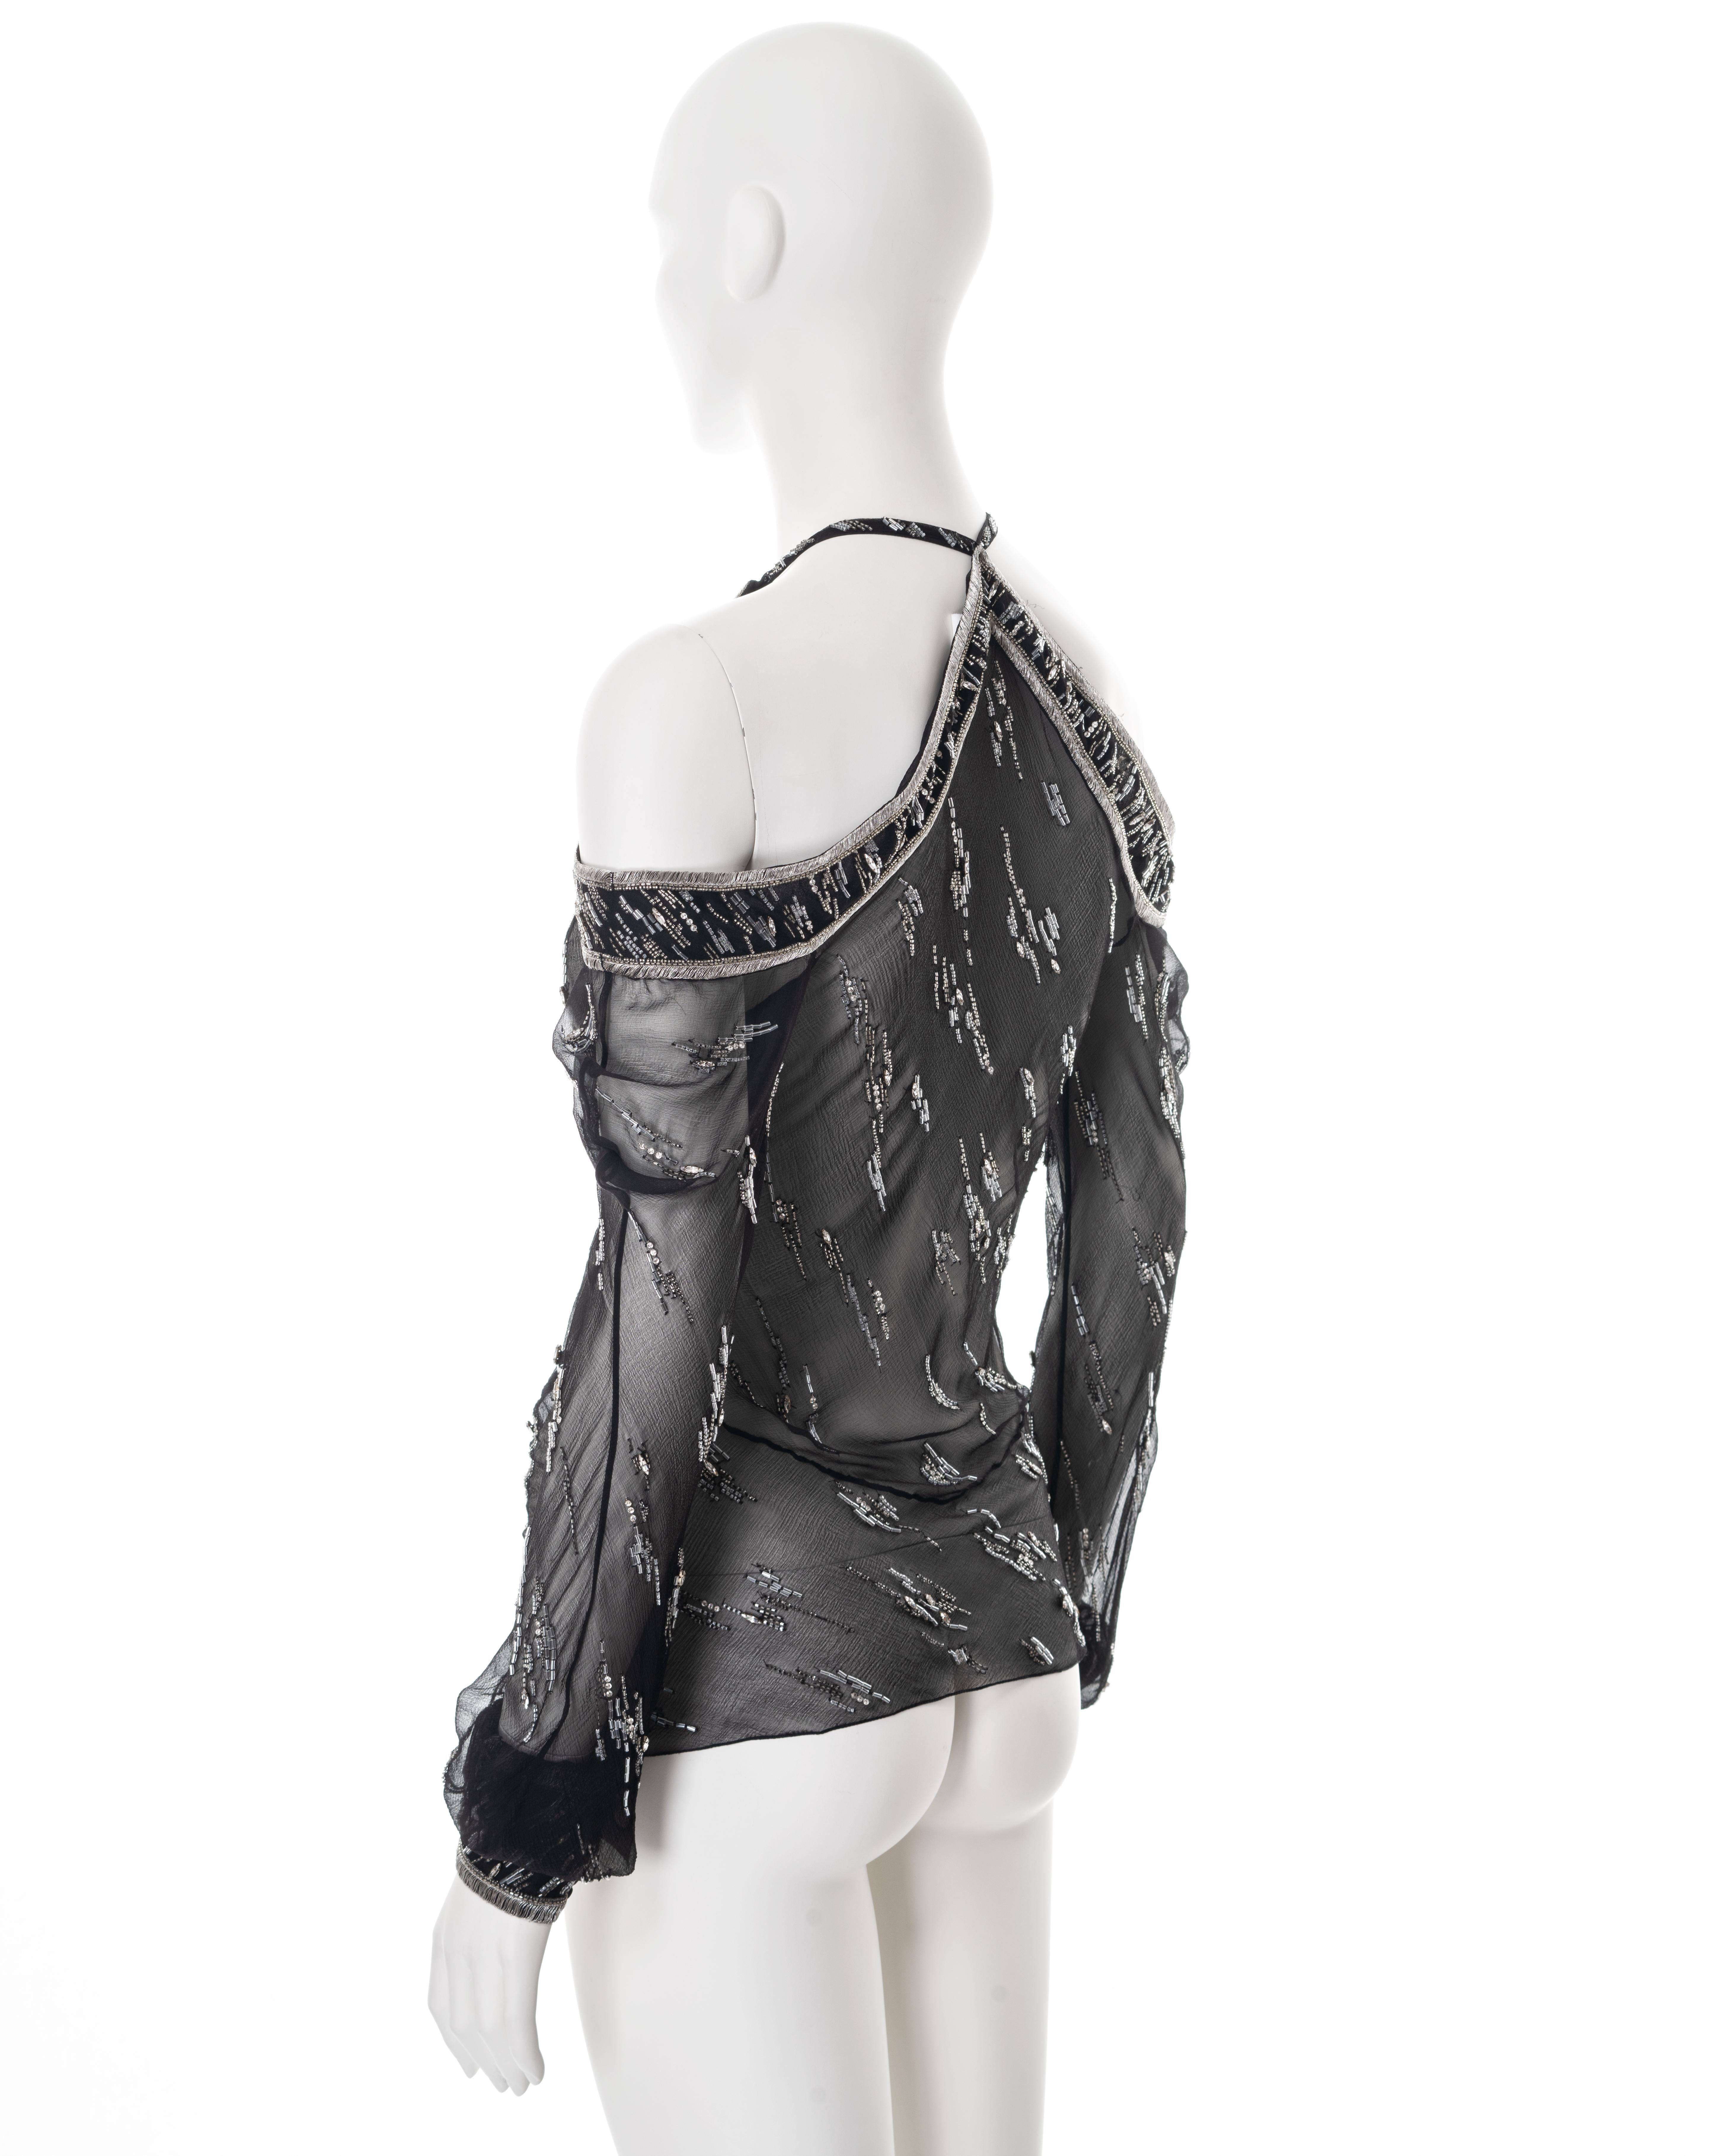 Christian Dior by John Galliano embellished silk evening blouse, ss 2005 5